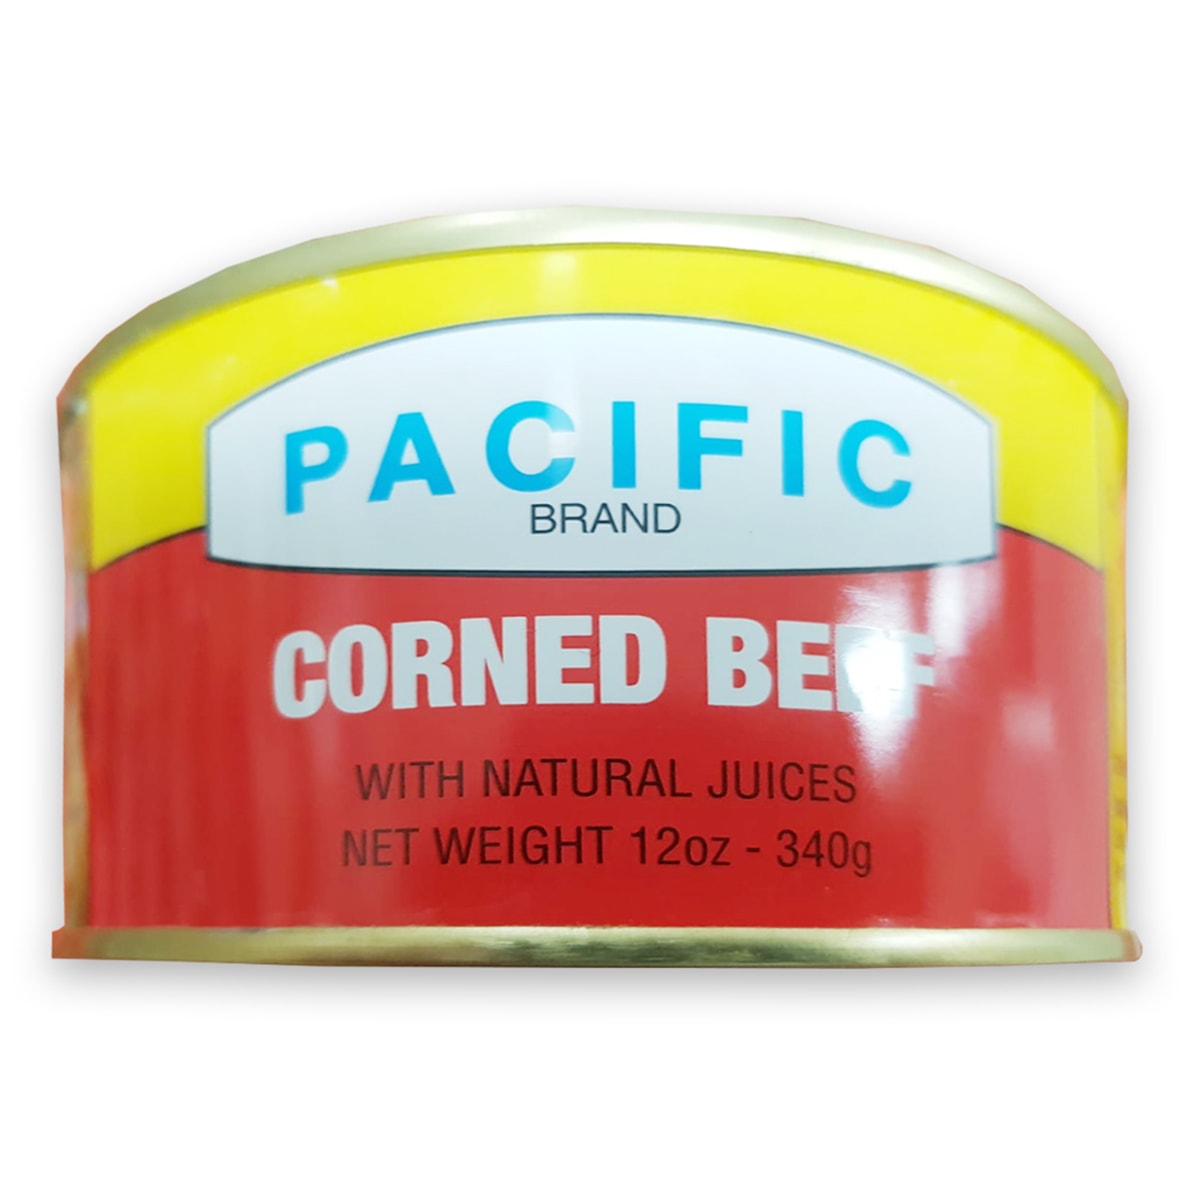 Buy Pacific Corned Beef with Natural Juices - 340 gm